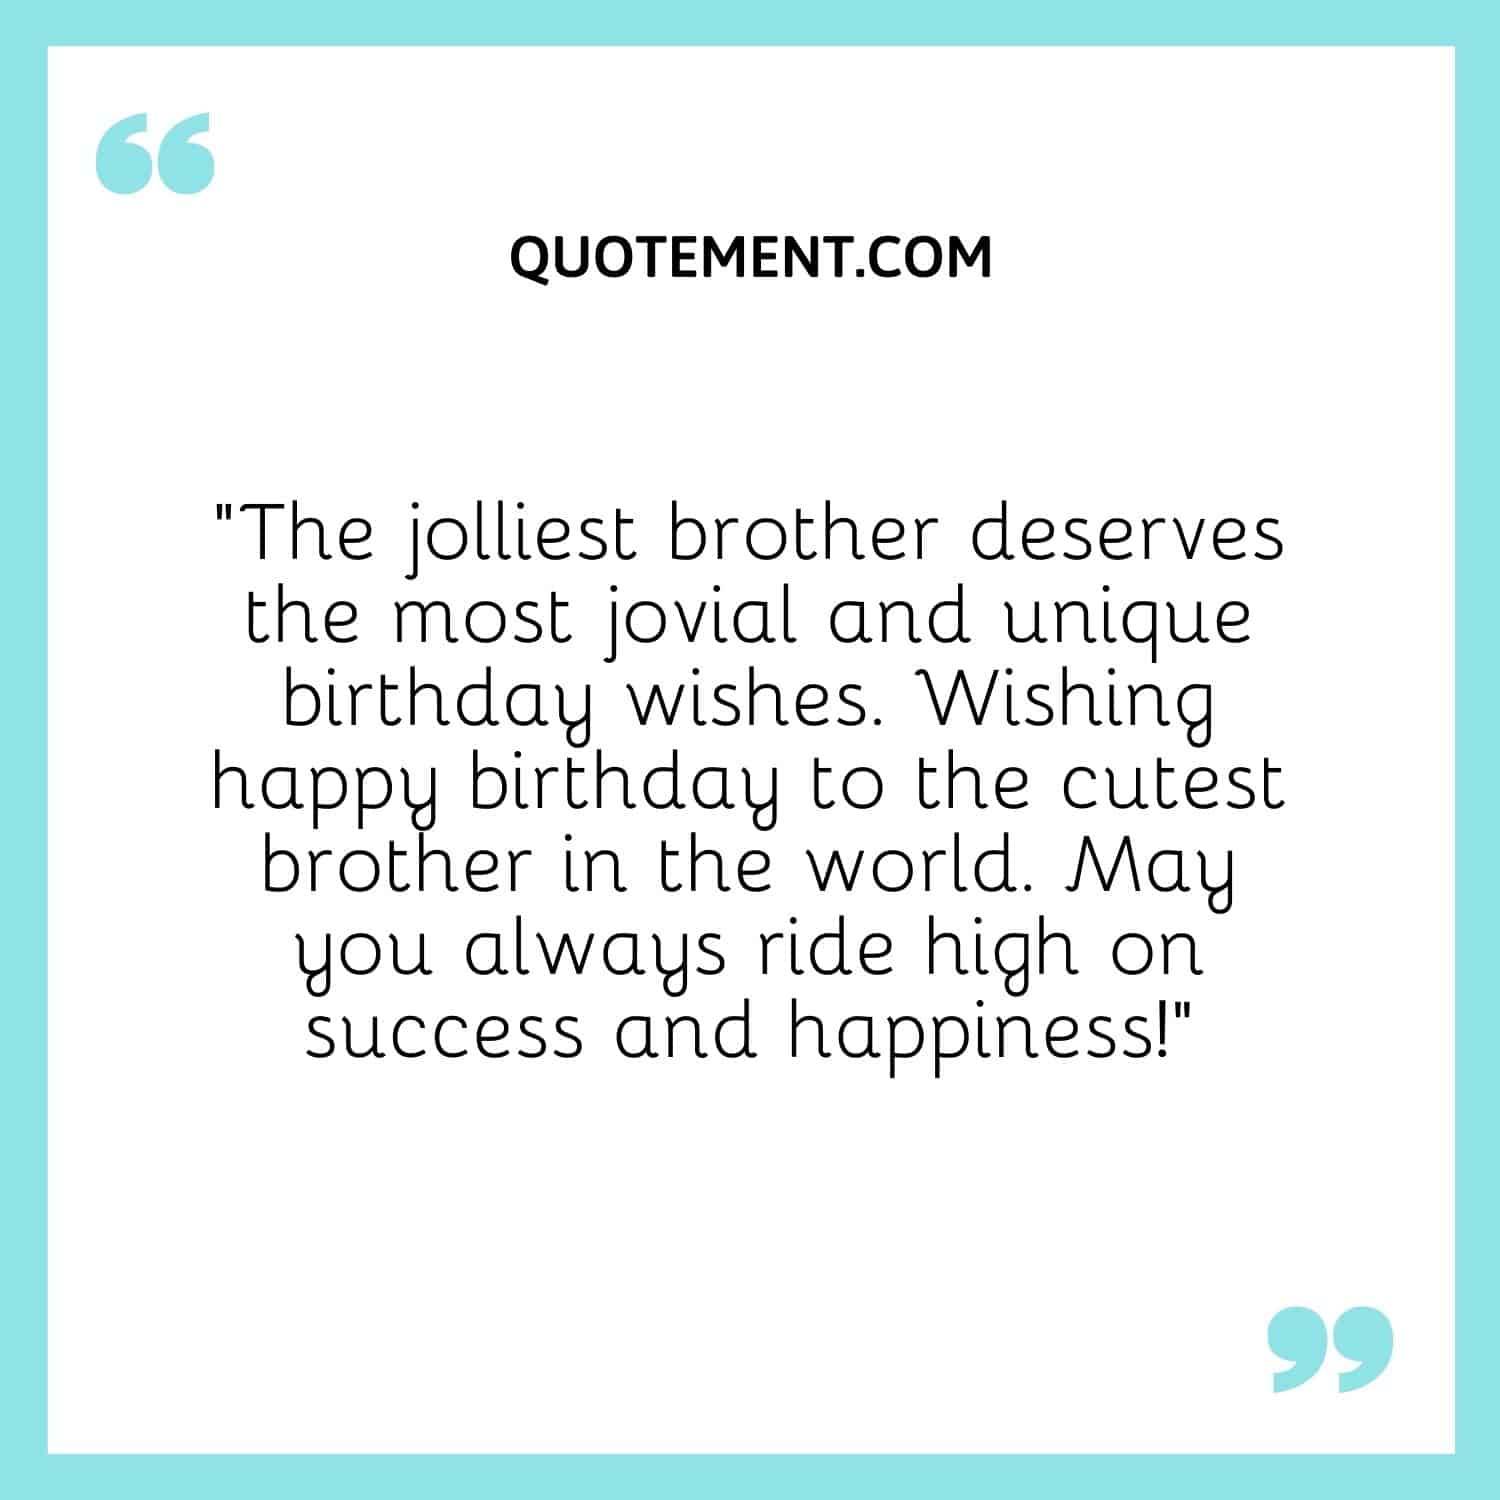 The jolliest brother deserves the most jovial and unique birthday wishes.